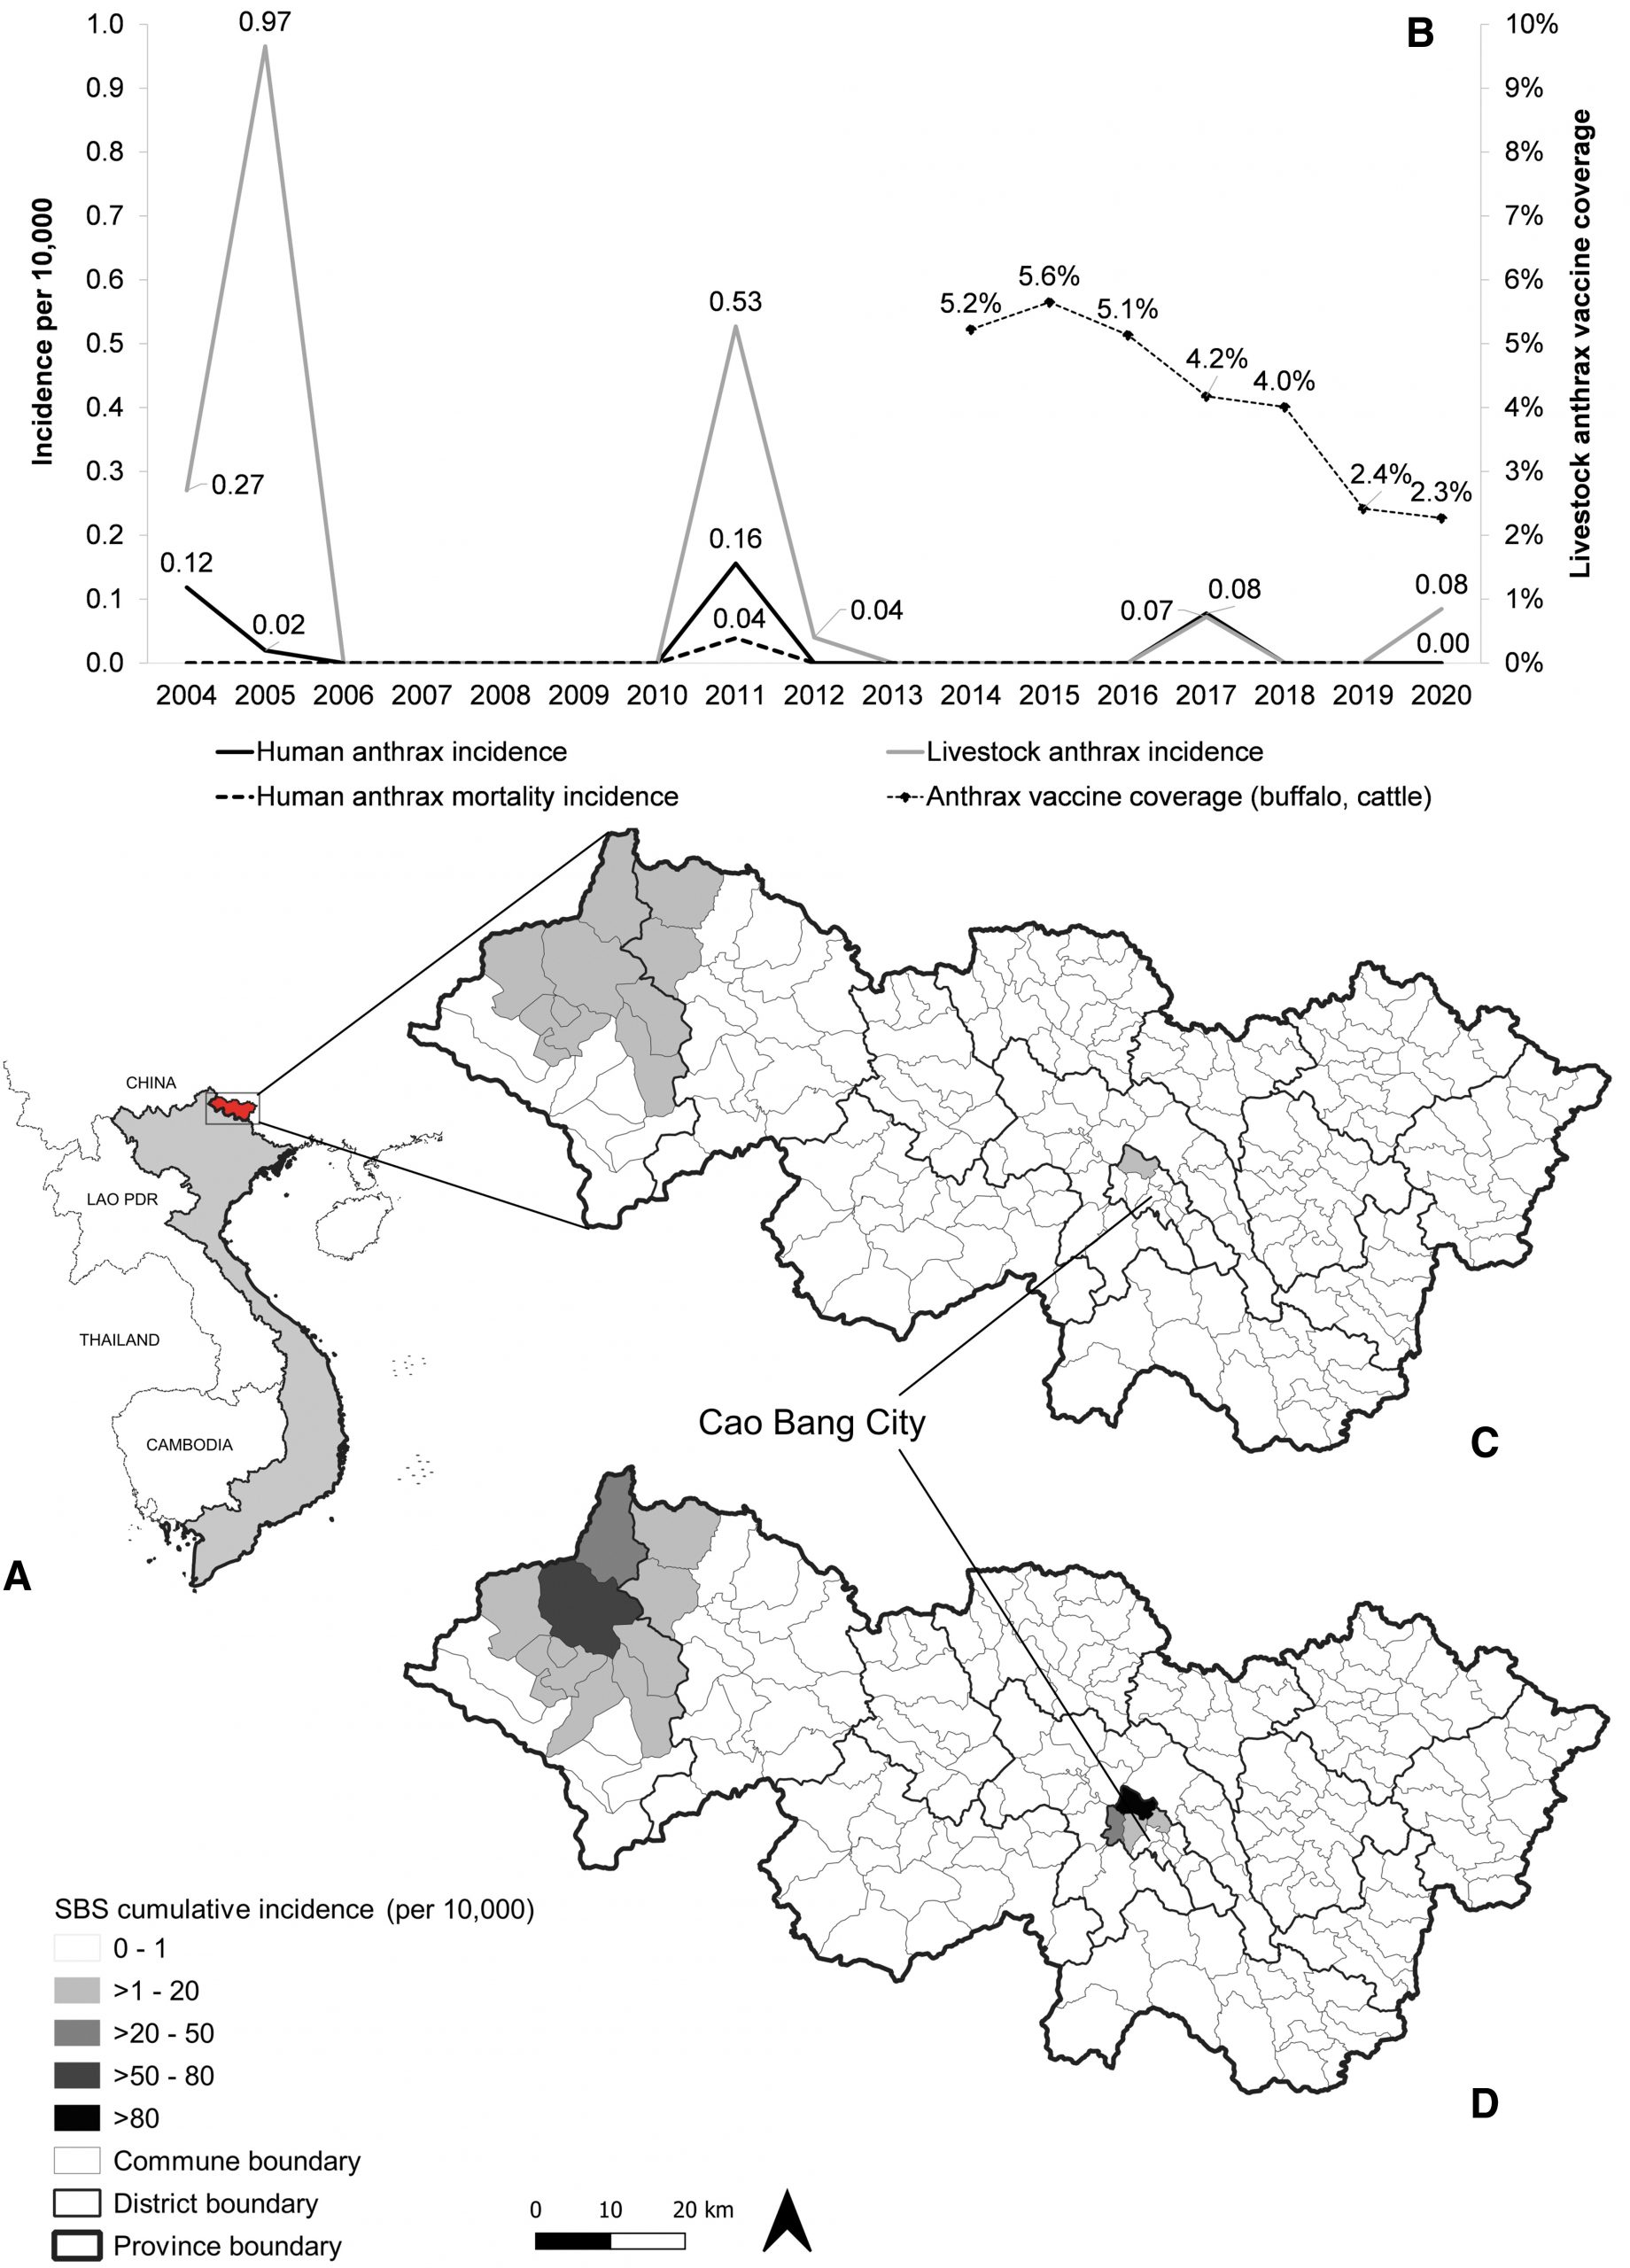 A line graph and map are shown. The line graph shows the provincial-level incidence of human and livestock anthrax, human anthrax fatalities, and anthrax vaccine coverage in buffalo and cattle. The maps show the location of Cat Bang province in Vietnam, as well as the spatial distribution of anthrax incidence in humans in the top map and cattle in the bottom map.